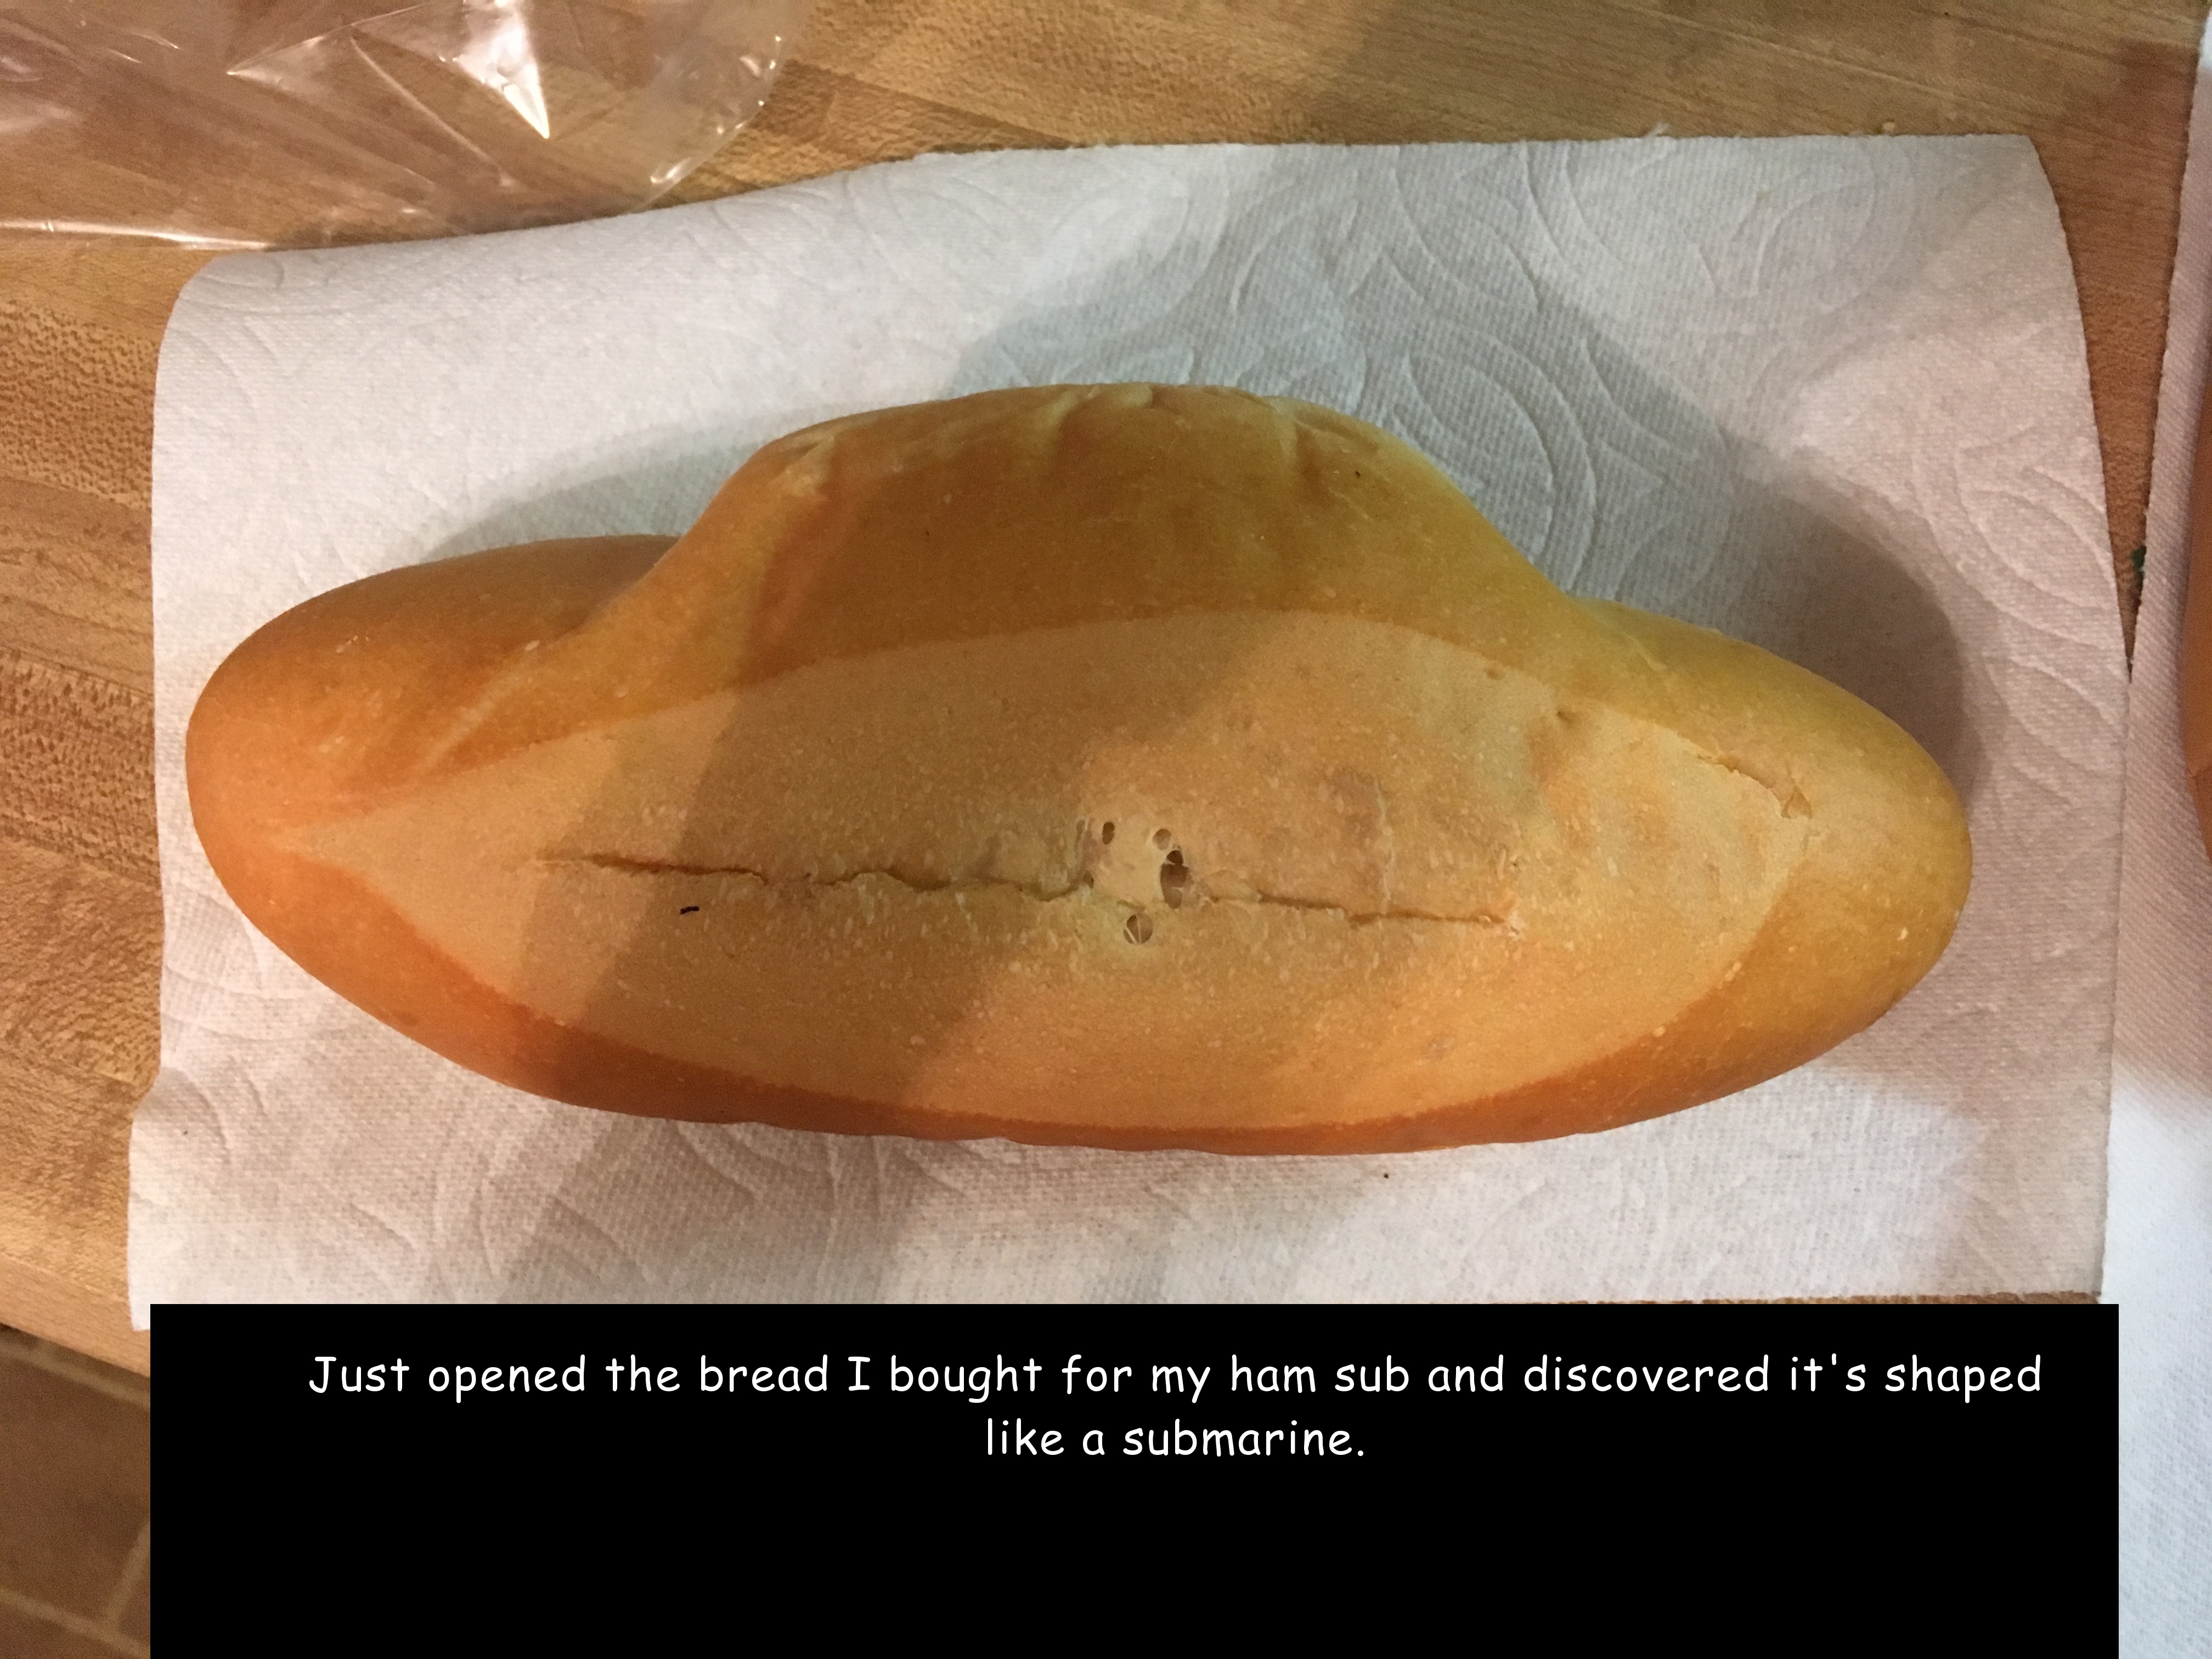 orange - Just opened the bread I bought for my ham sub and discovered it's shaped a submarine.